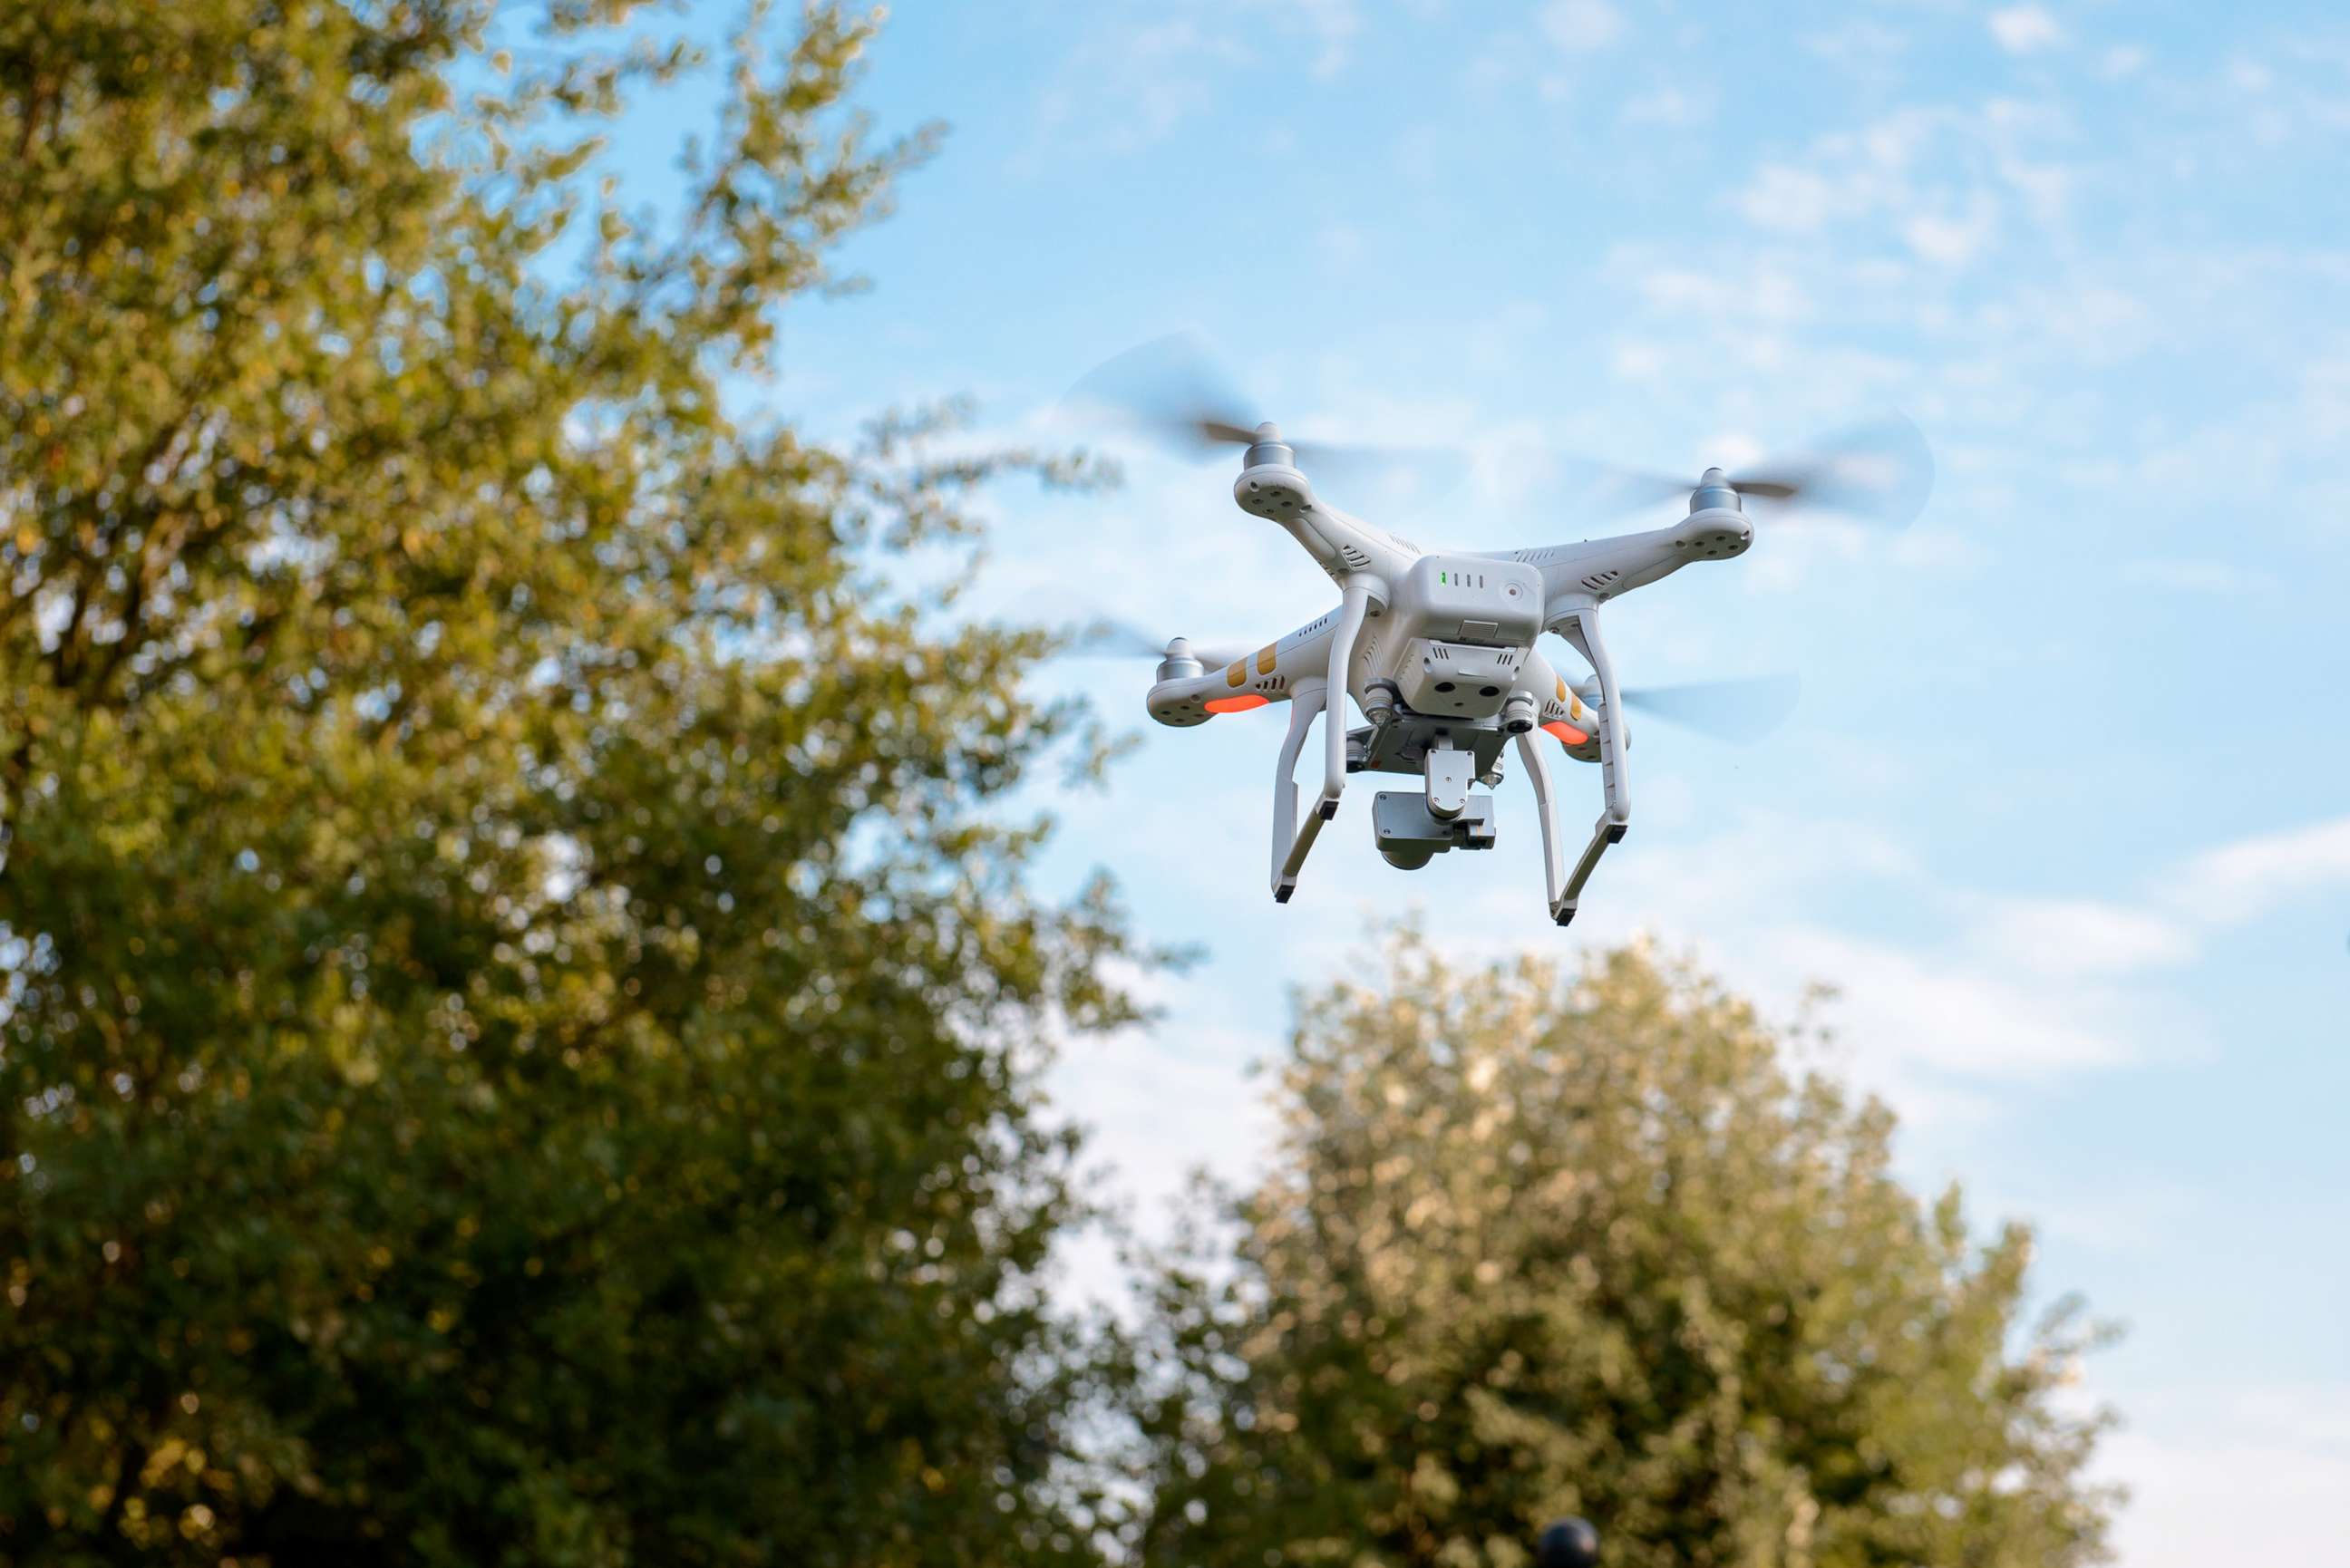 PHOTO: A drones is seen in this stock image.